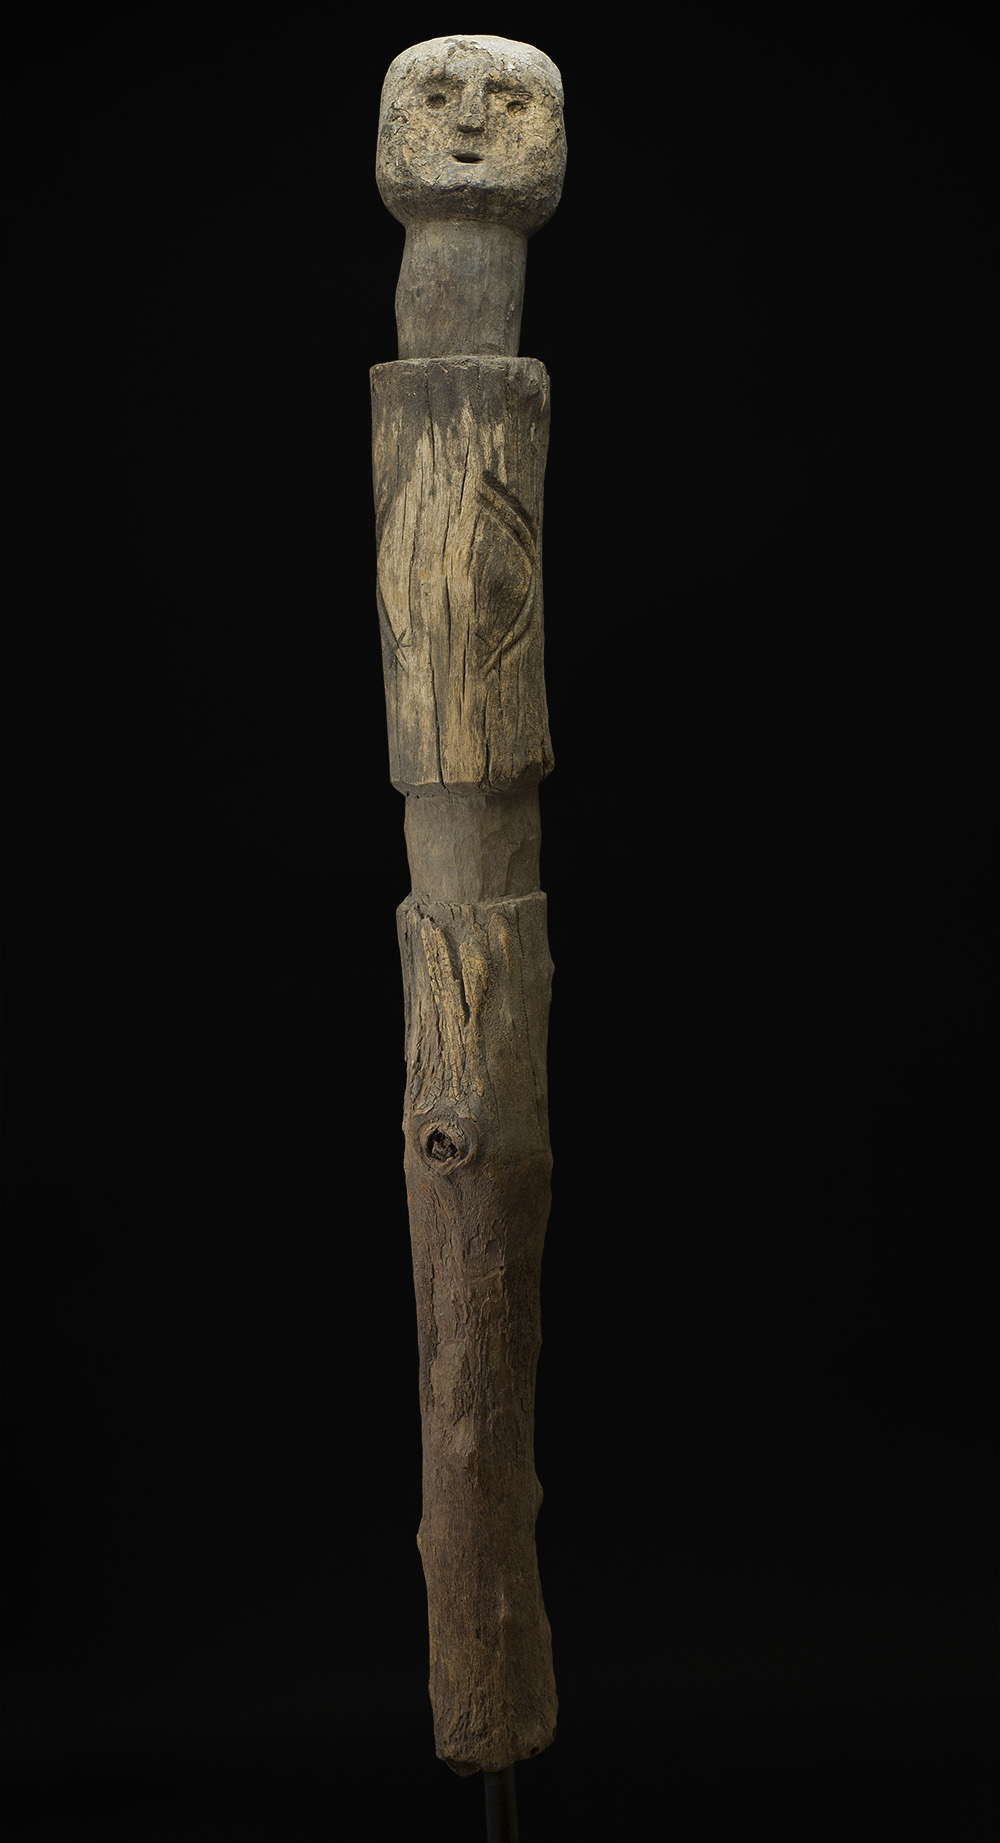   Africa    Bocio - Ewe People - Togo  , Early 20th C. Wood, sacrificial materials 60.5 x 6 x 6 inches 153.7 x 15.2 x 15.2 cm Af 301 